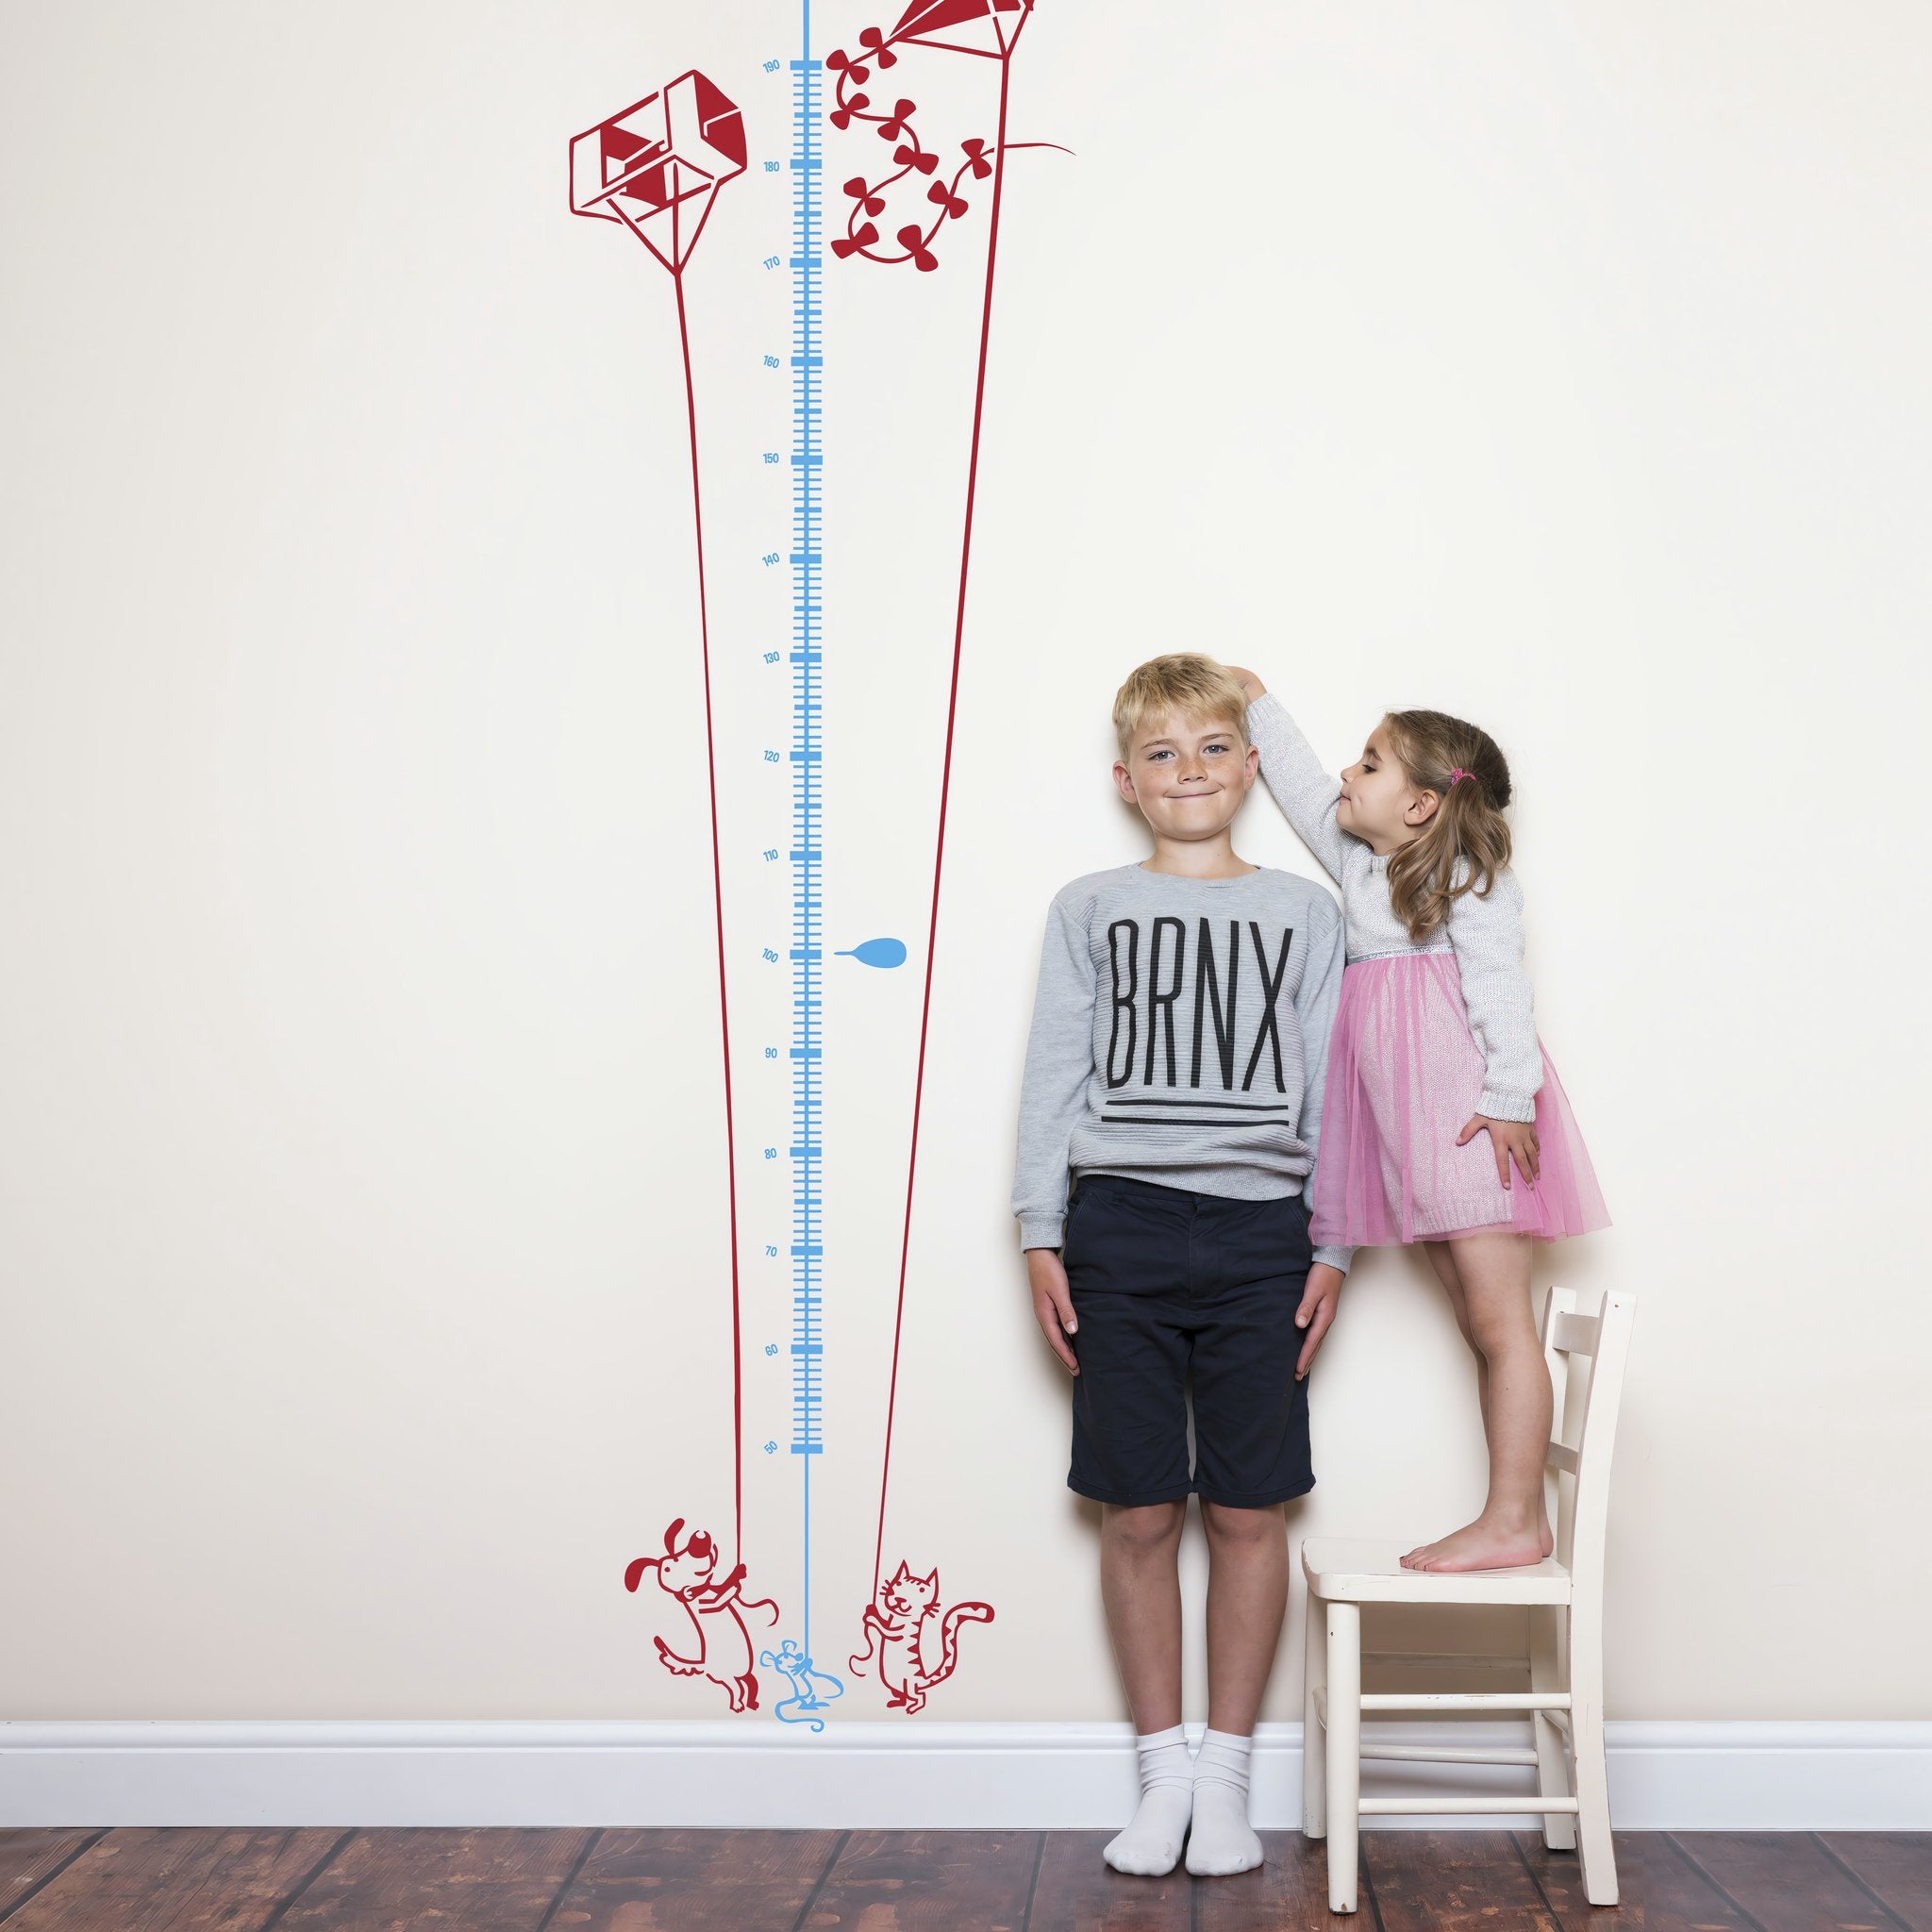 Height chart wall sticker of a kite being flown by a cat and dog with a young boy and girl nearby.